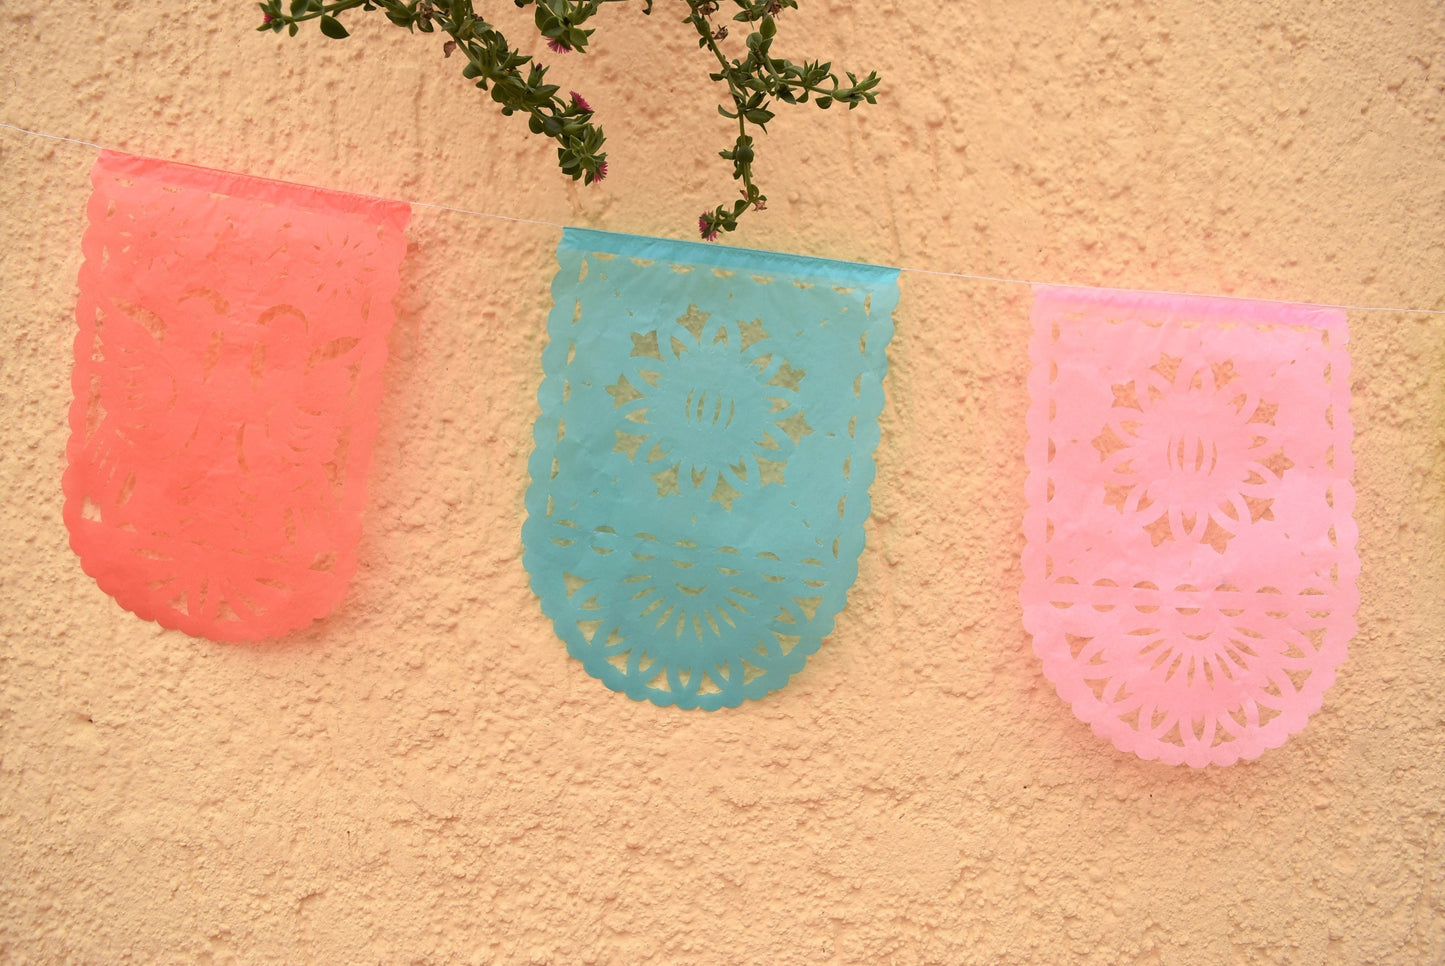 Pretty Pastel Papel Picado Party Bunting | 5m/16.4ft Pastel Colour Bunting with 16 Medium Sized Flags - ARTMEXICO